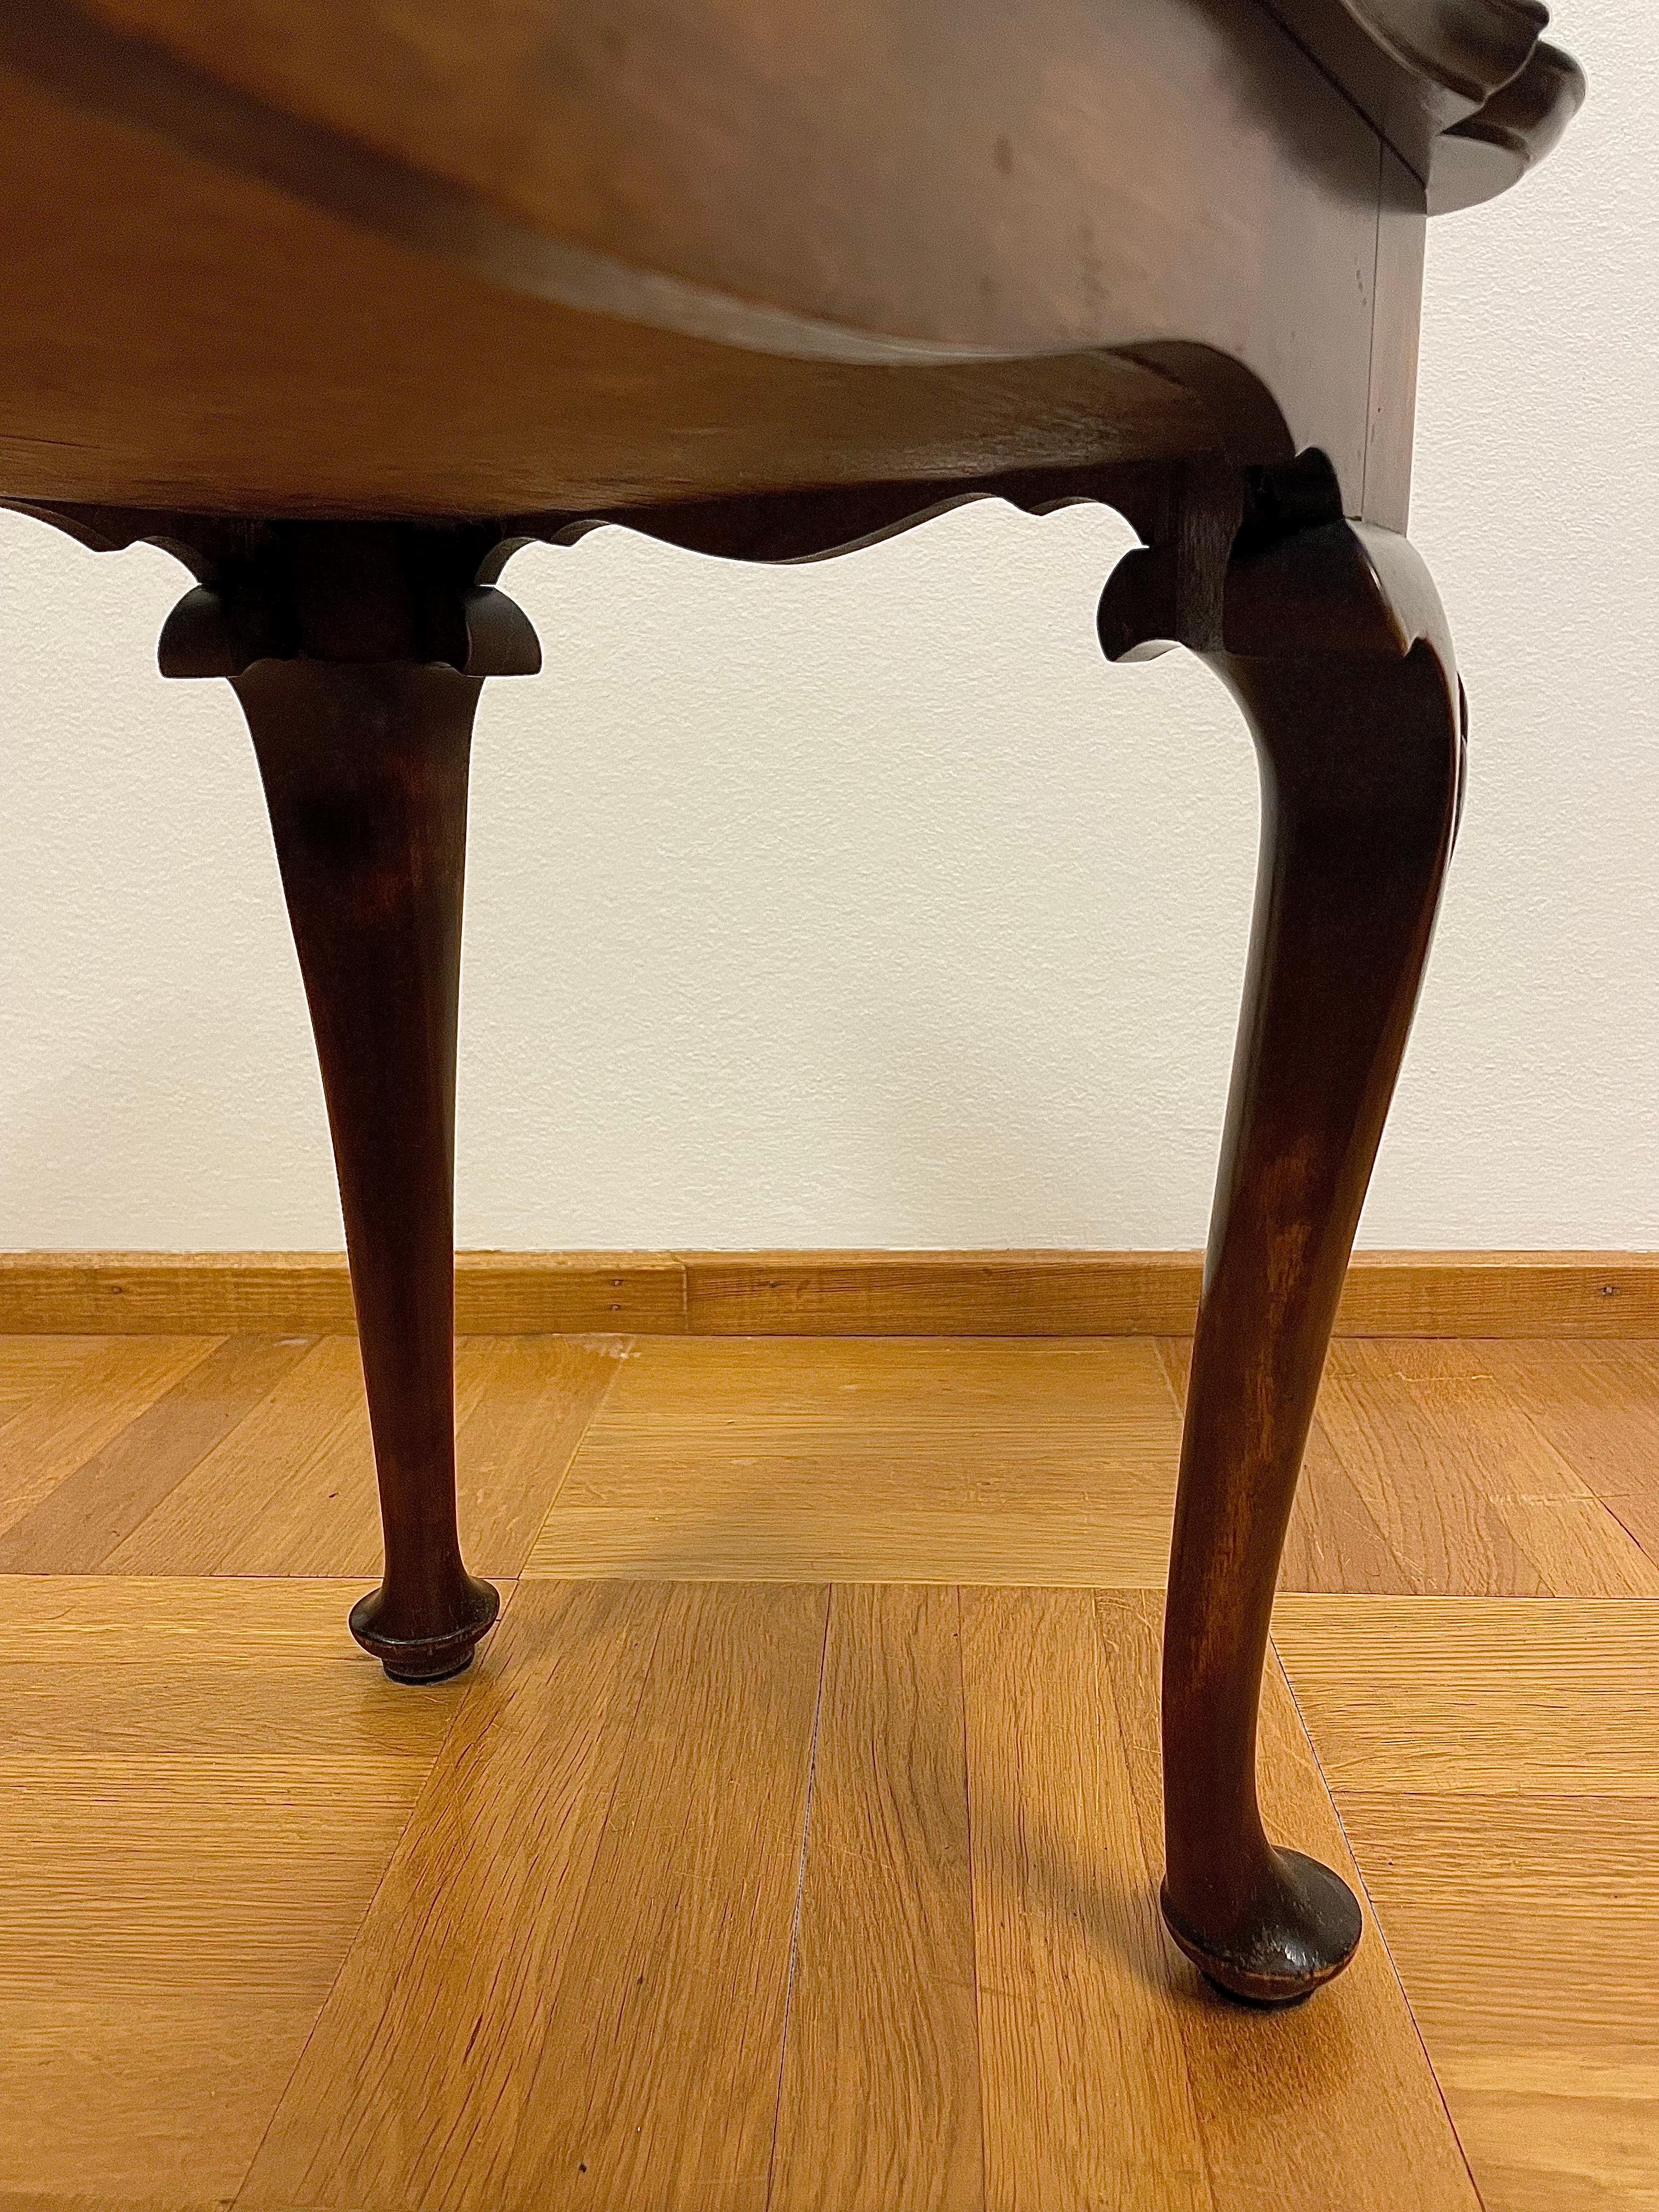 Swedish Tray Table in Stained Birch Manufactured 13/3 1929 by Nordiska Kompaniet For Sale 8